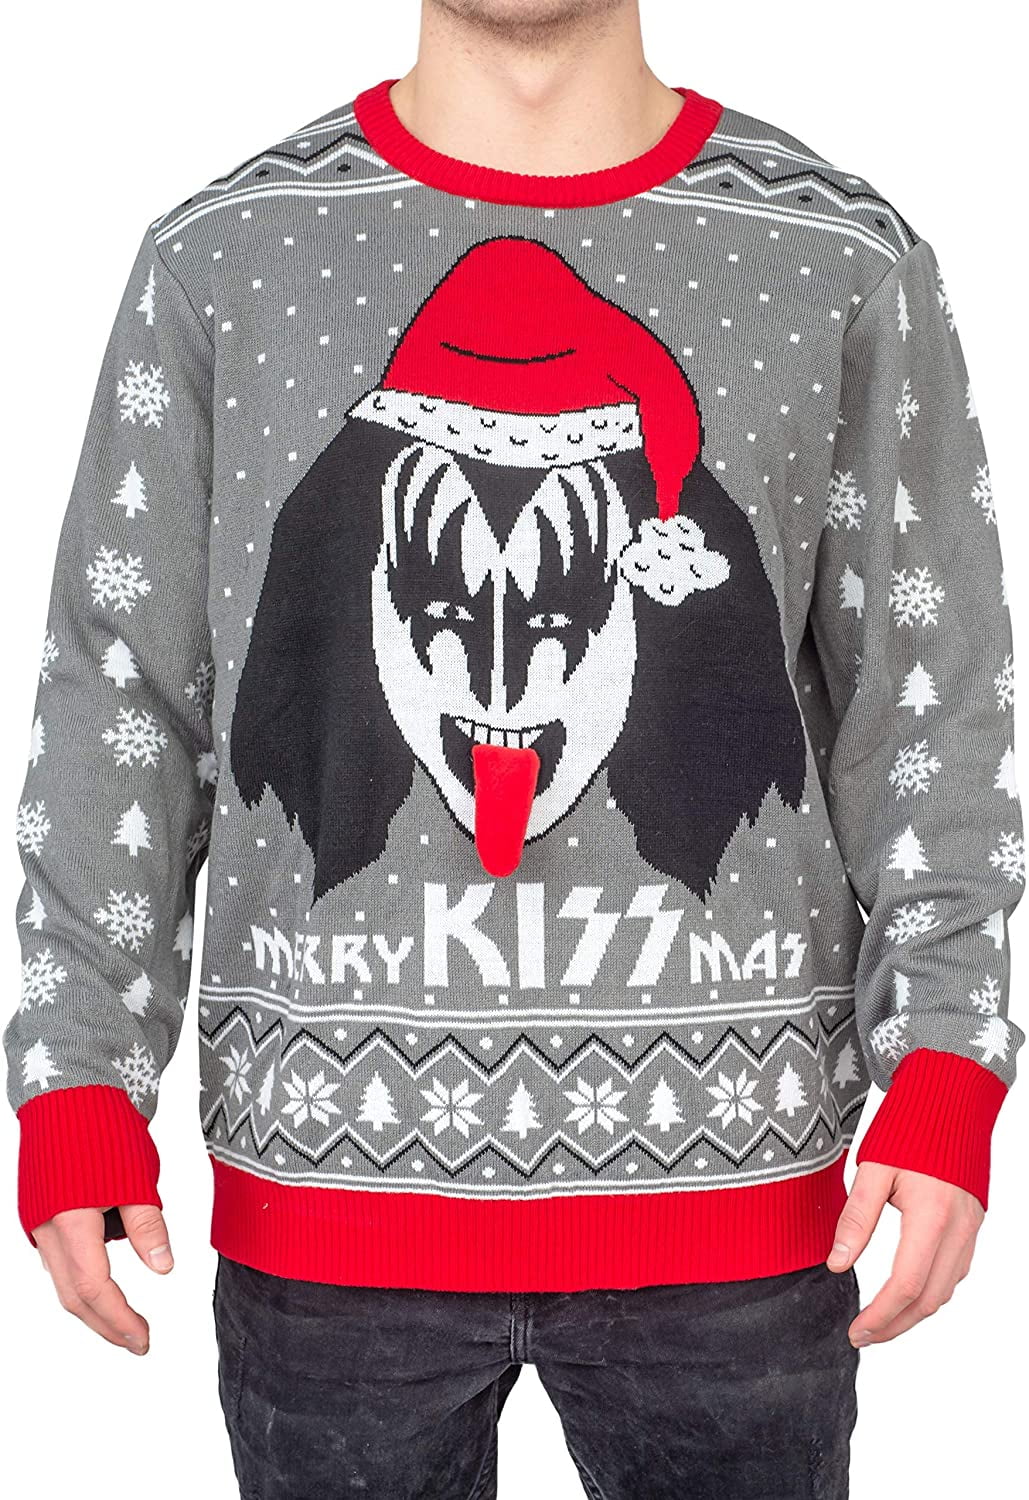 I Was Made For Lovin You Kiss Custom Ugly Christmas Sweater Roll